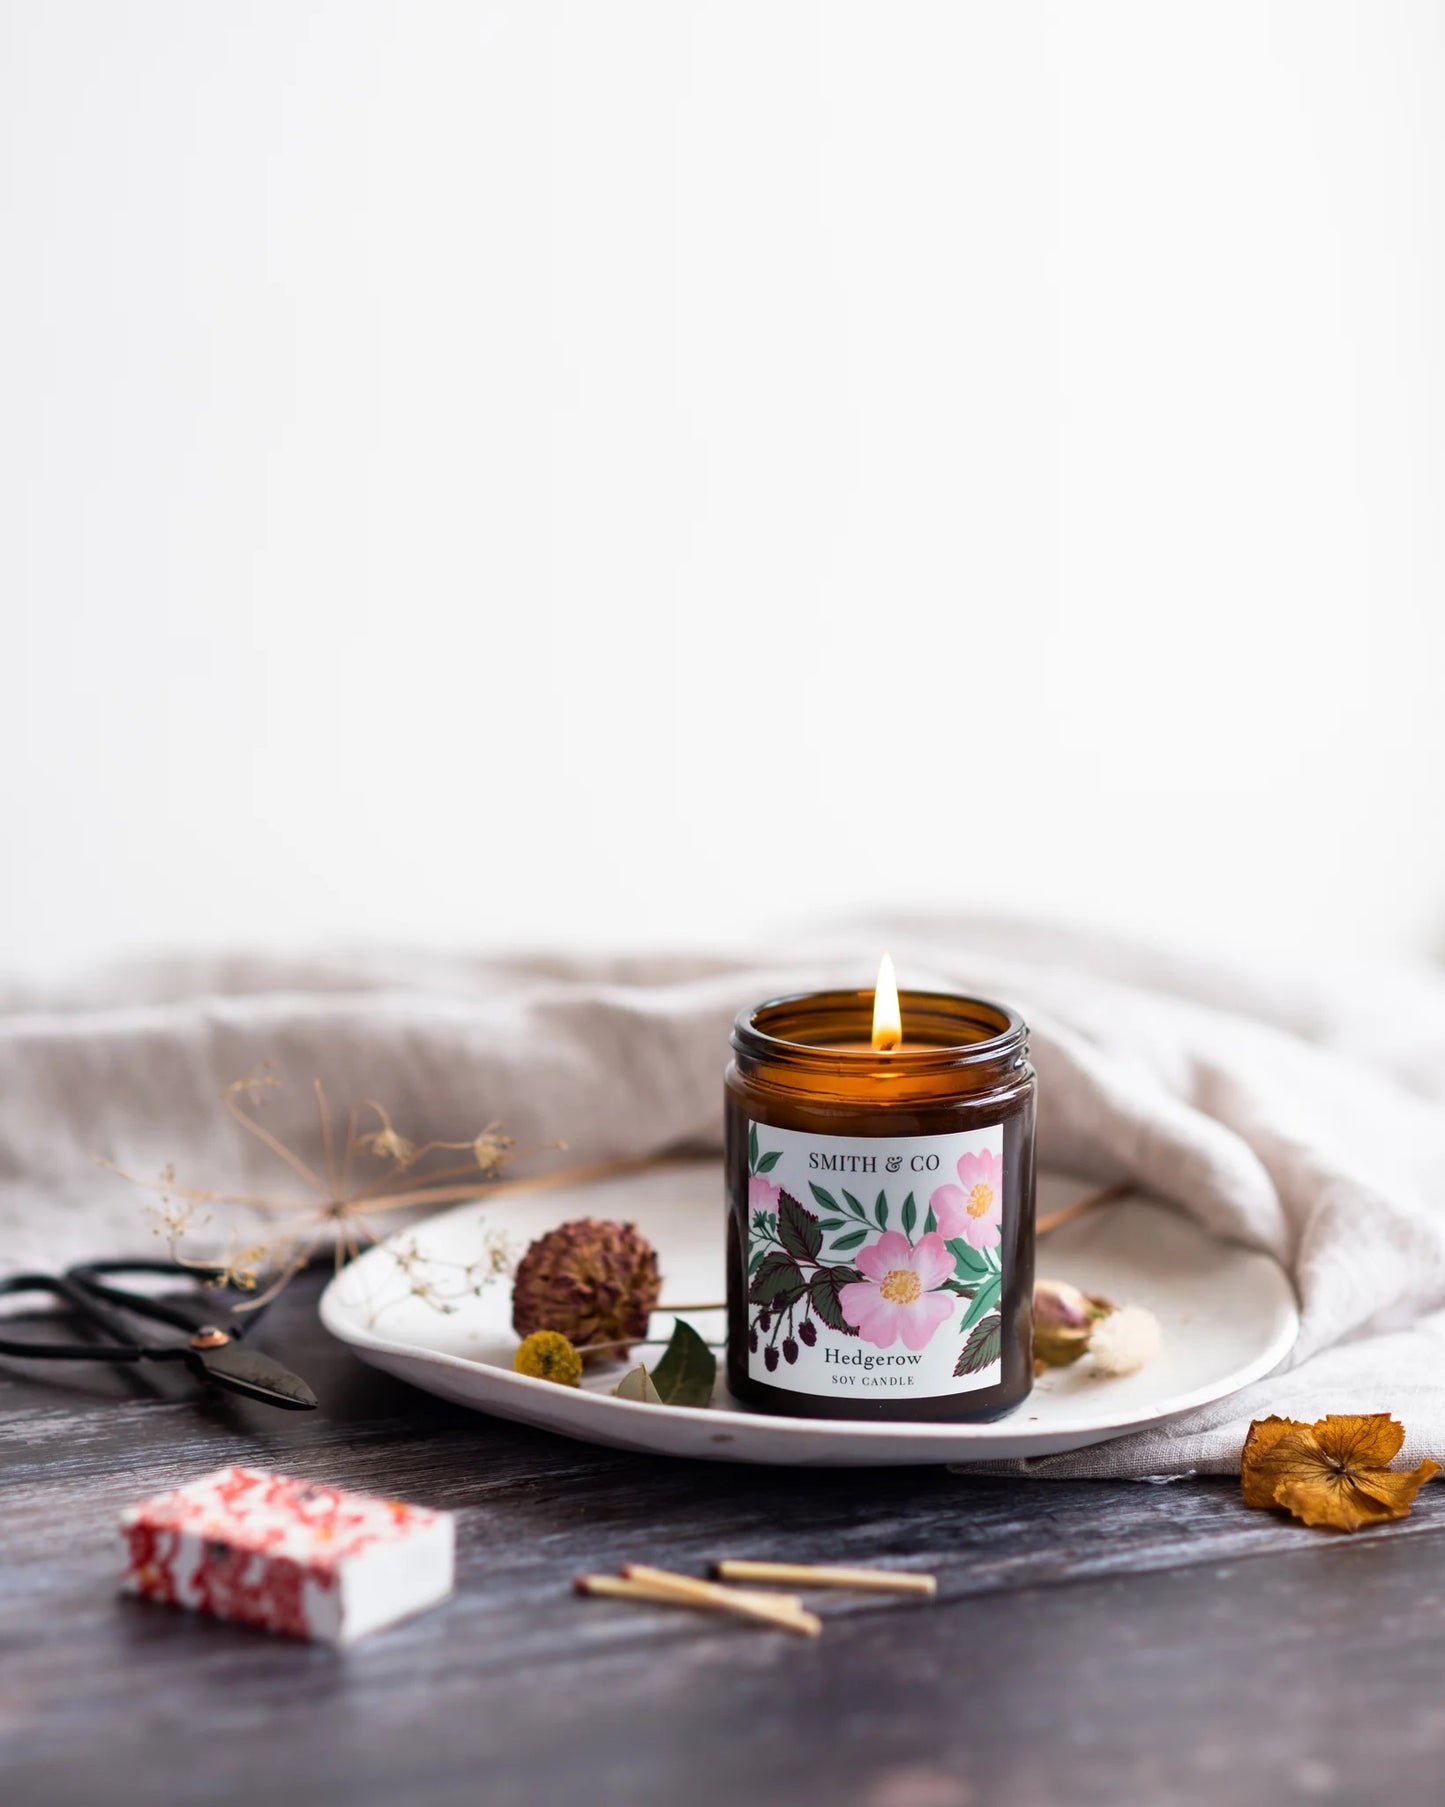 Hedgerow Soy Wax Candle